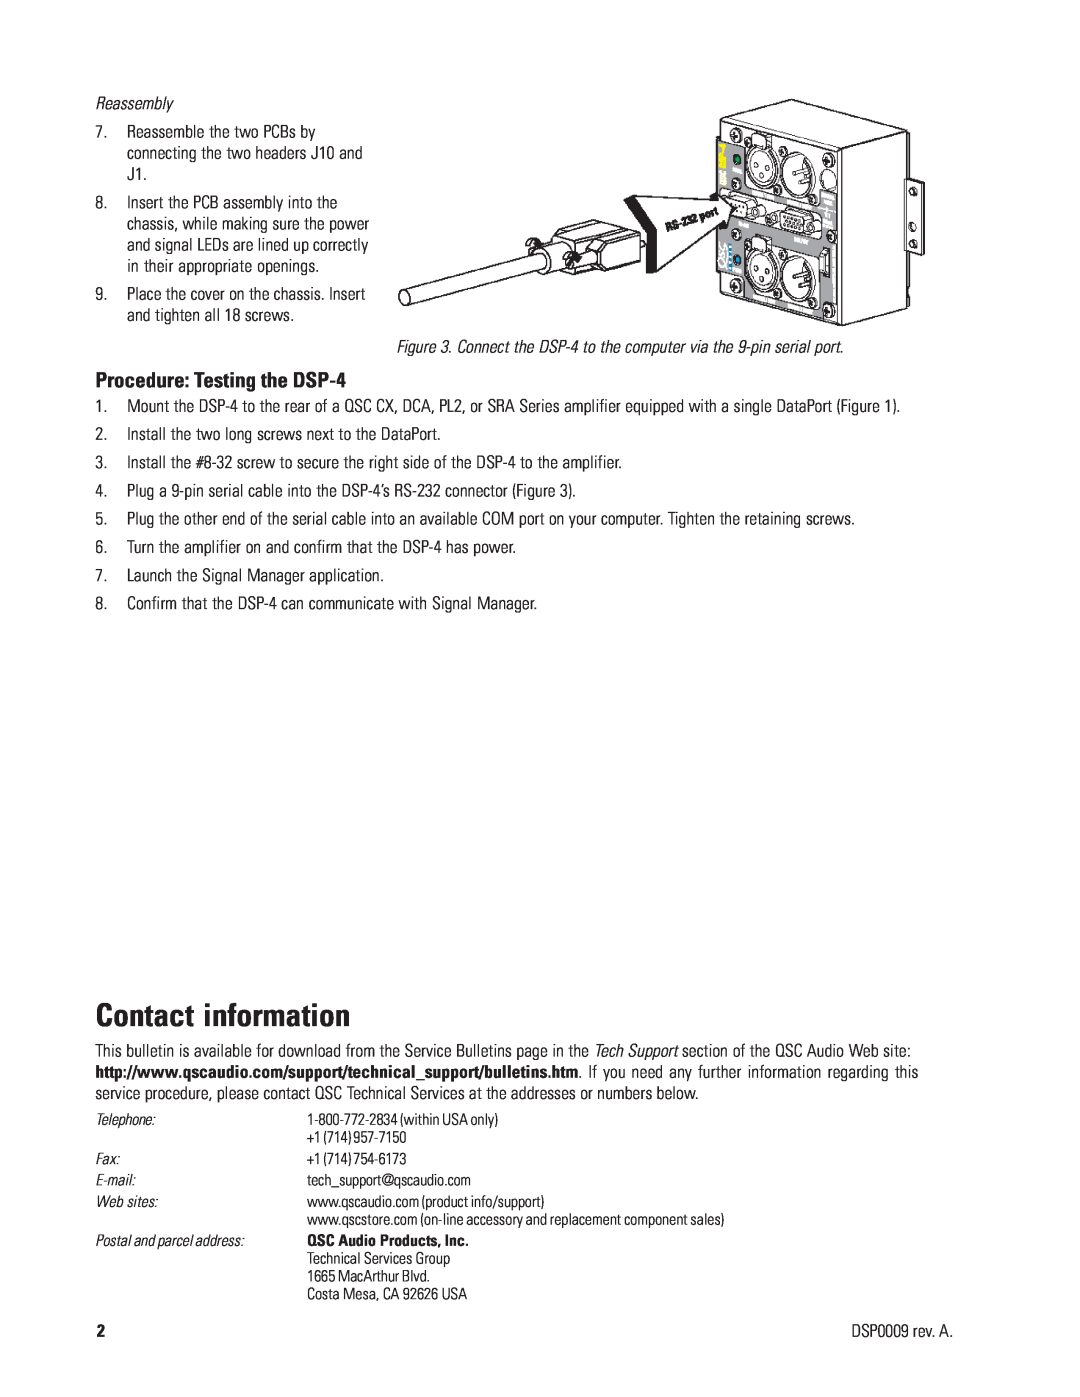 QSC Audio DSP-4 RS-232 manual Contact information, Procedure Testing the DSP-4, Reassembly 